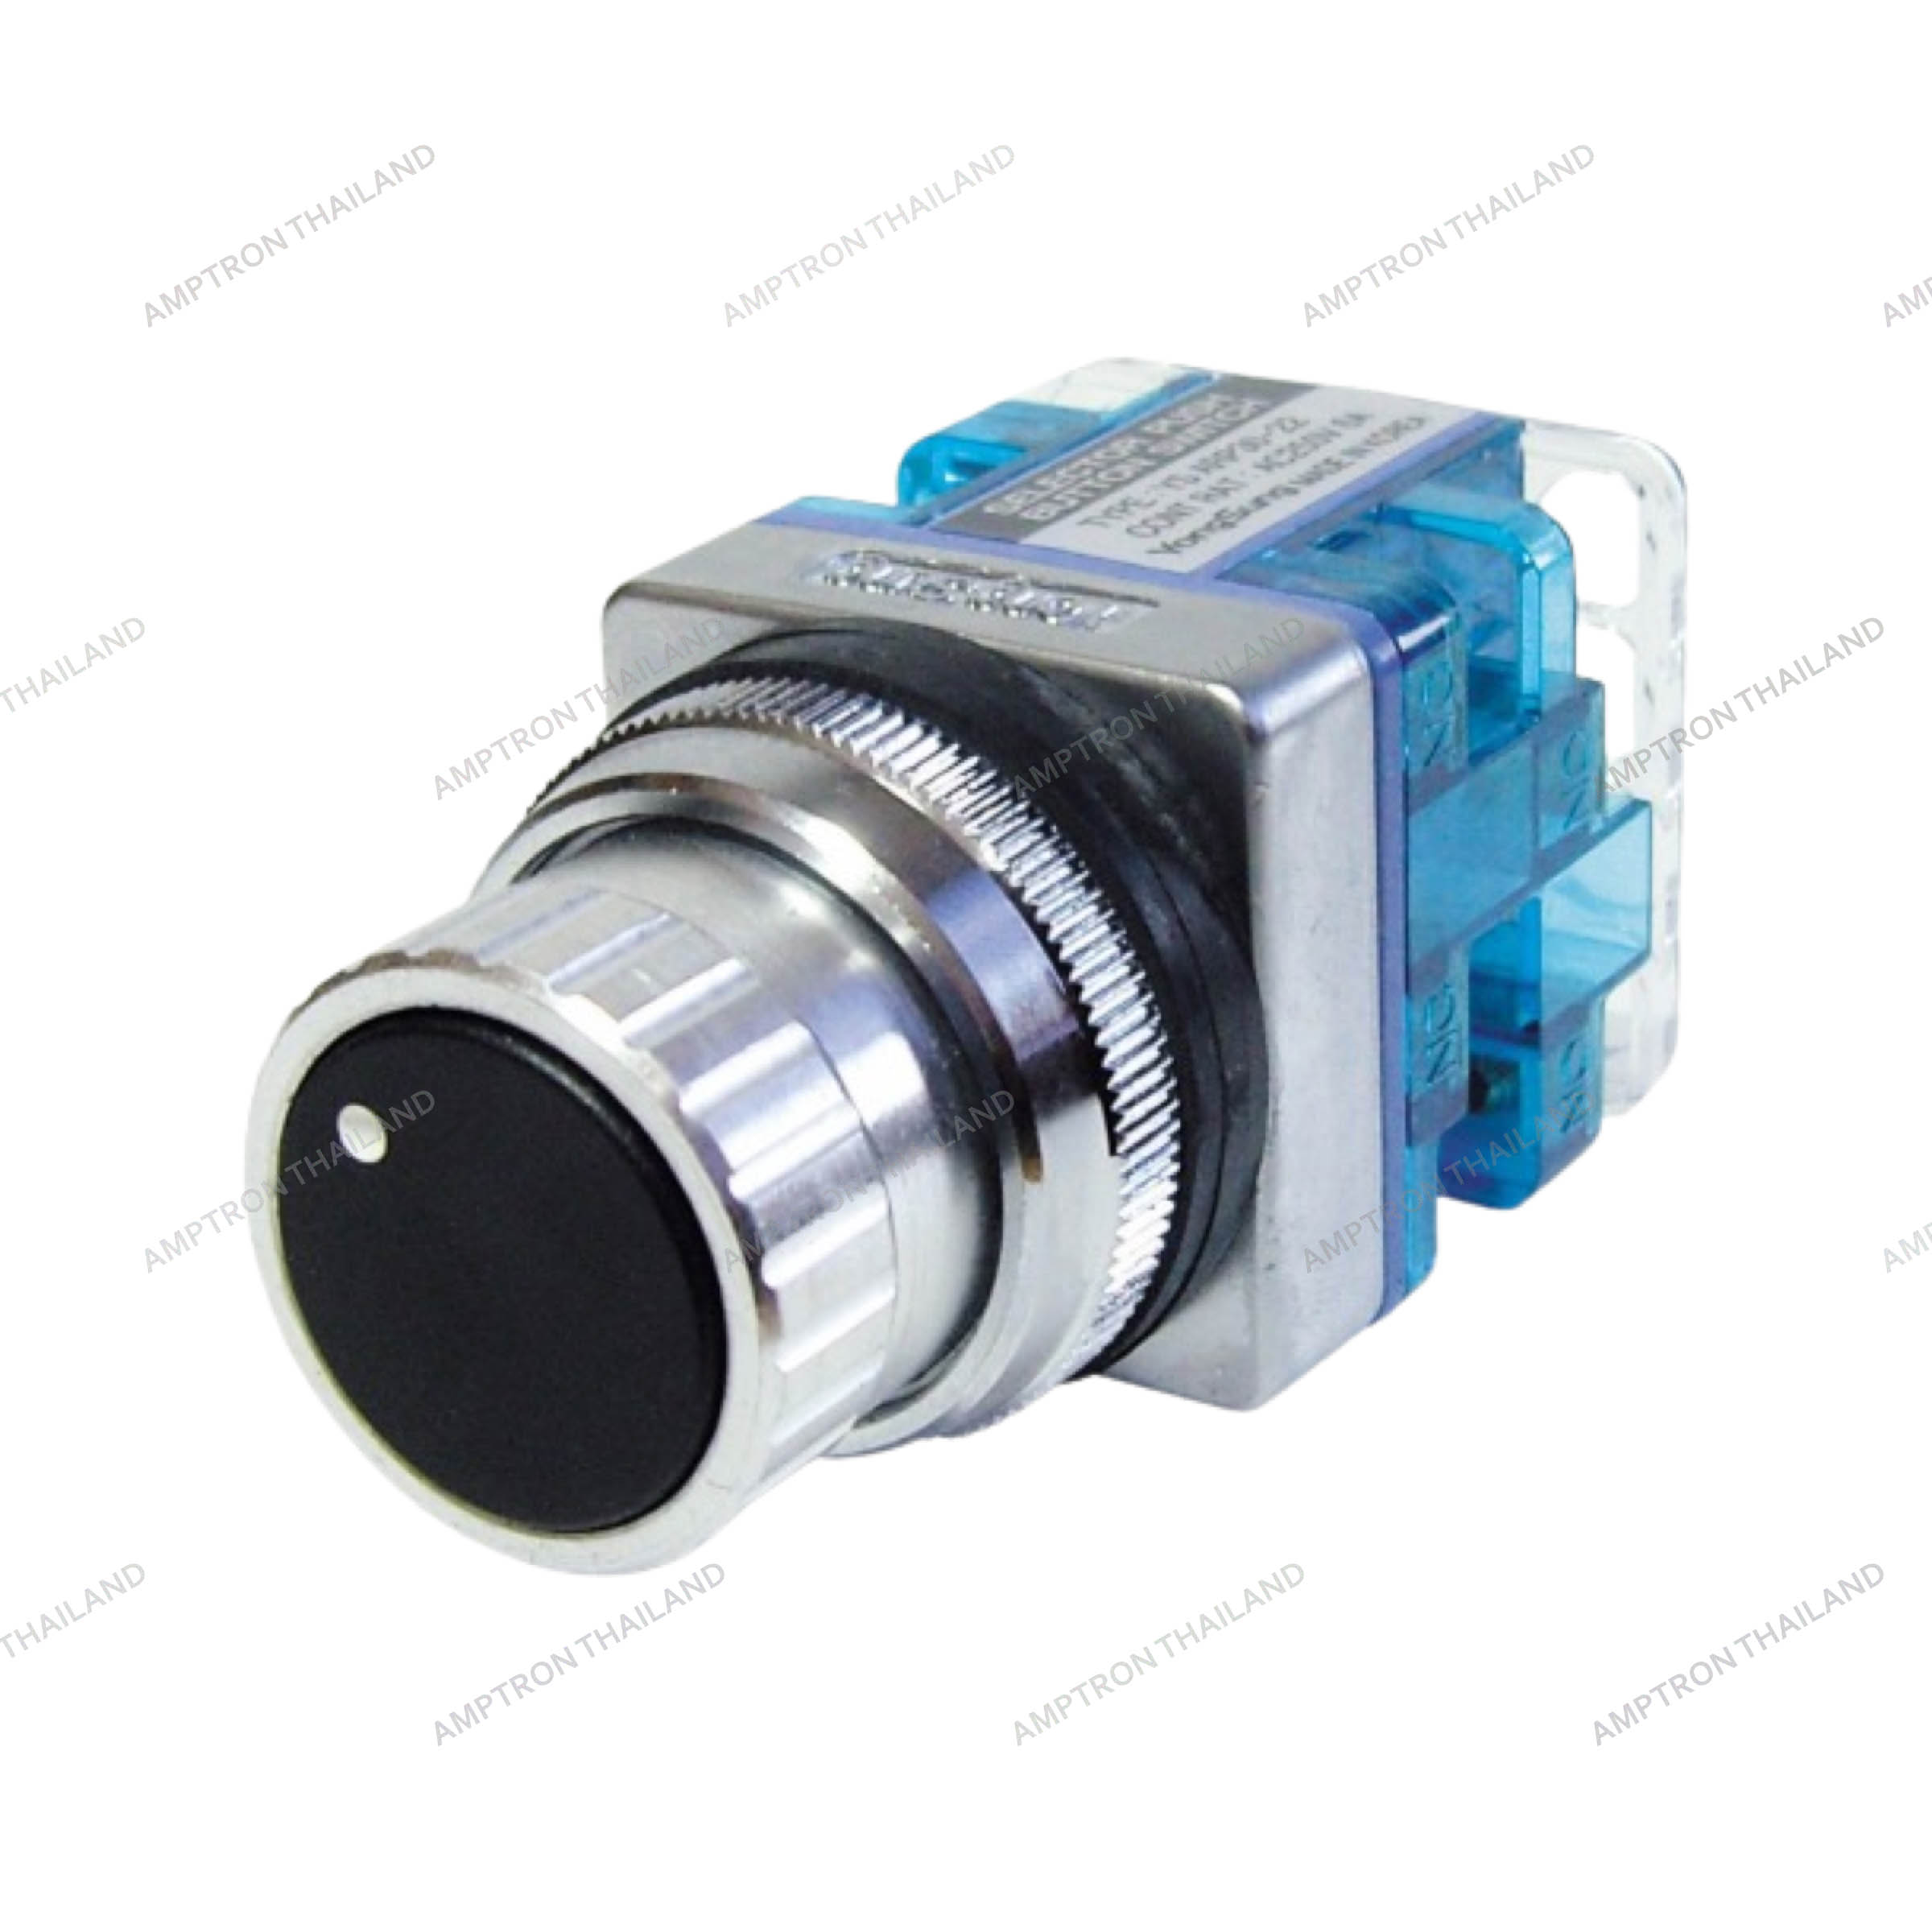 Selector Push Button Switch (A Type)